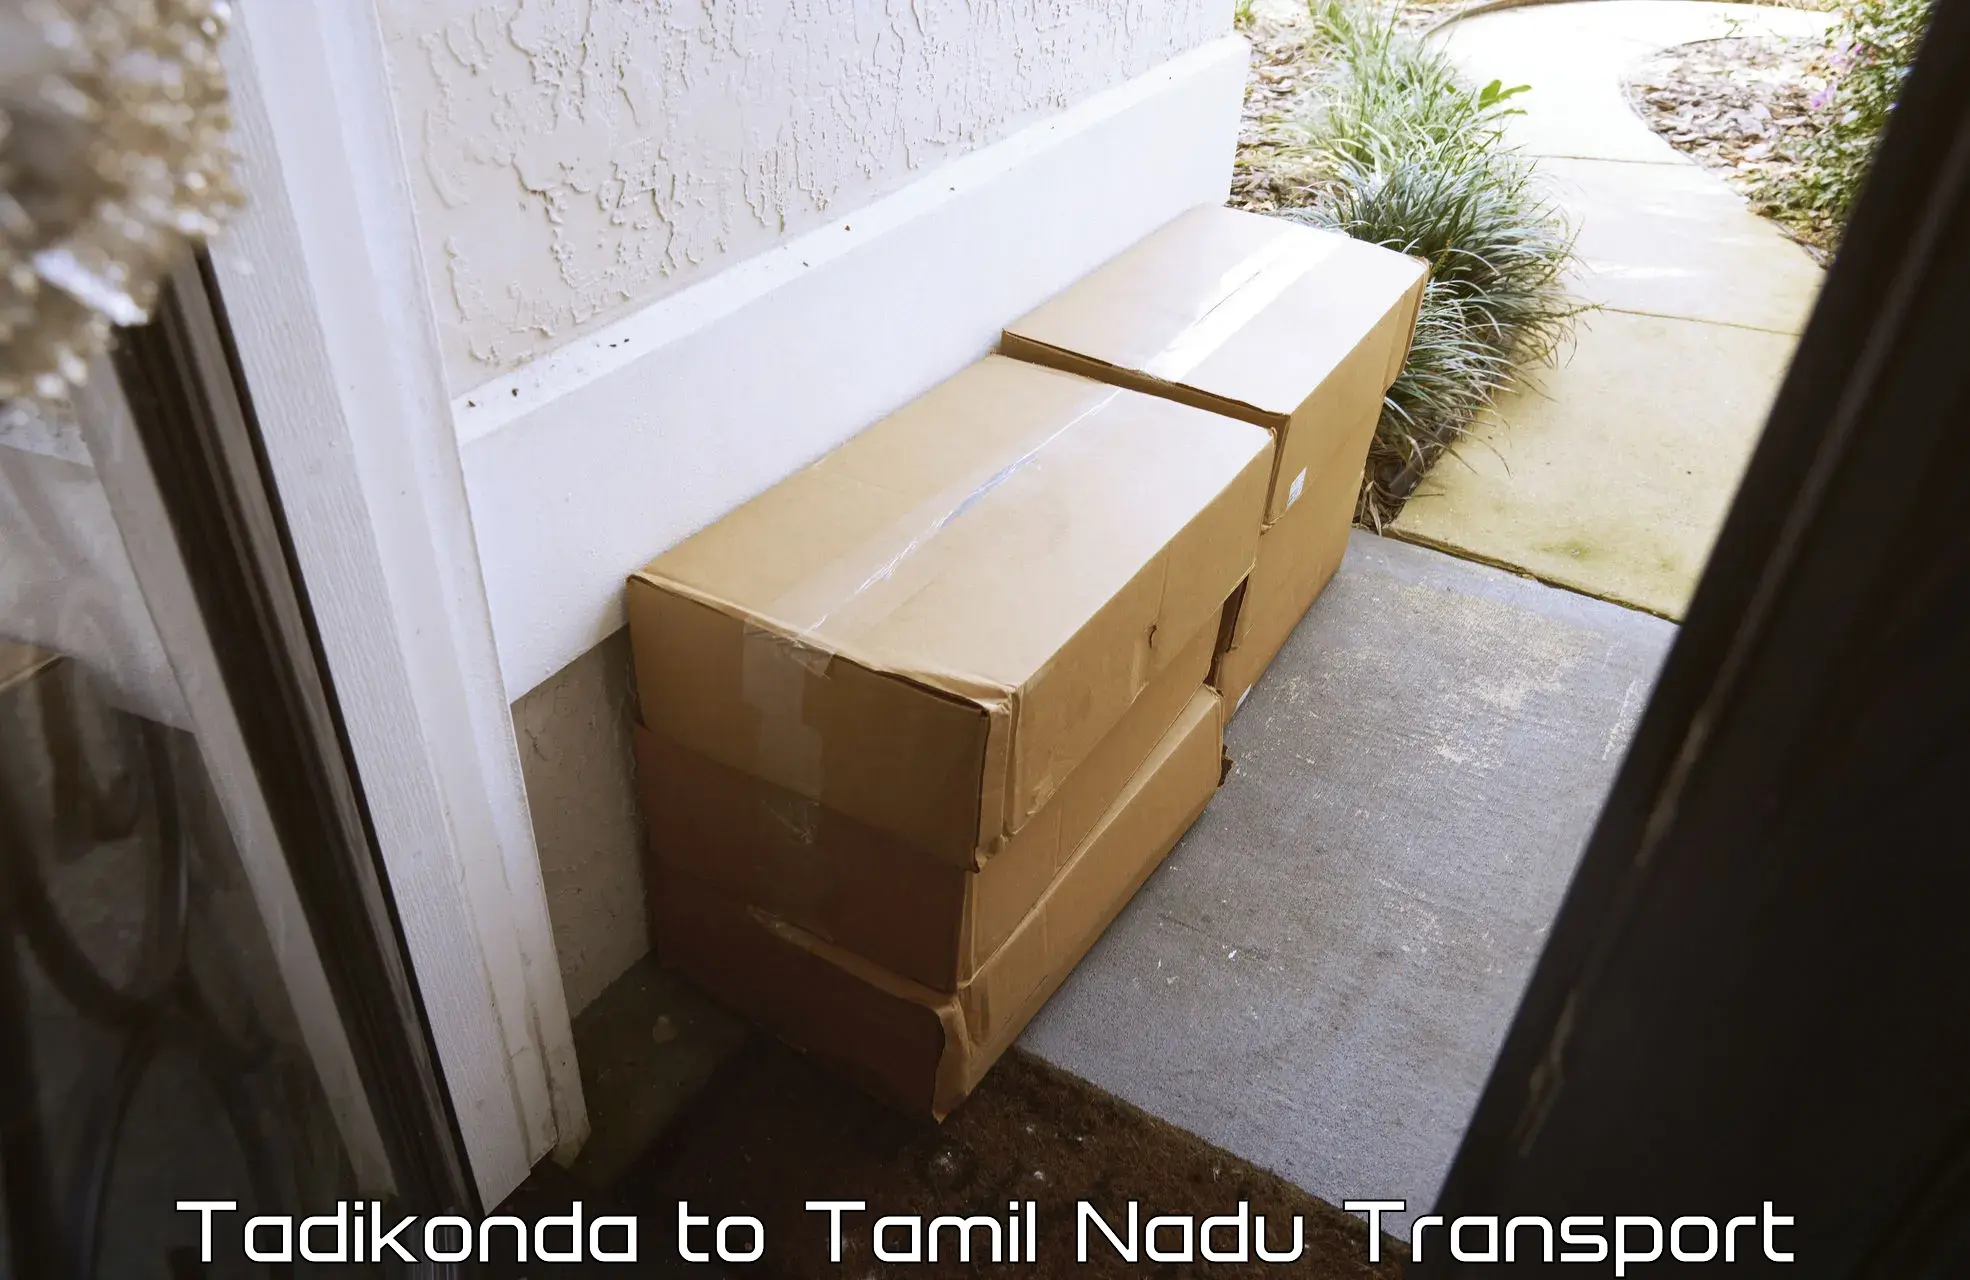 Delivery service Tadikonda to Sri Ramachandra Institute of Higher Education and Research Chennai